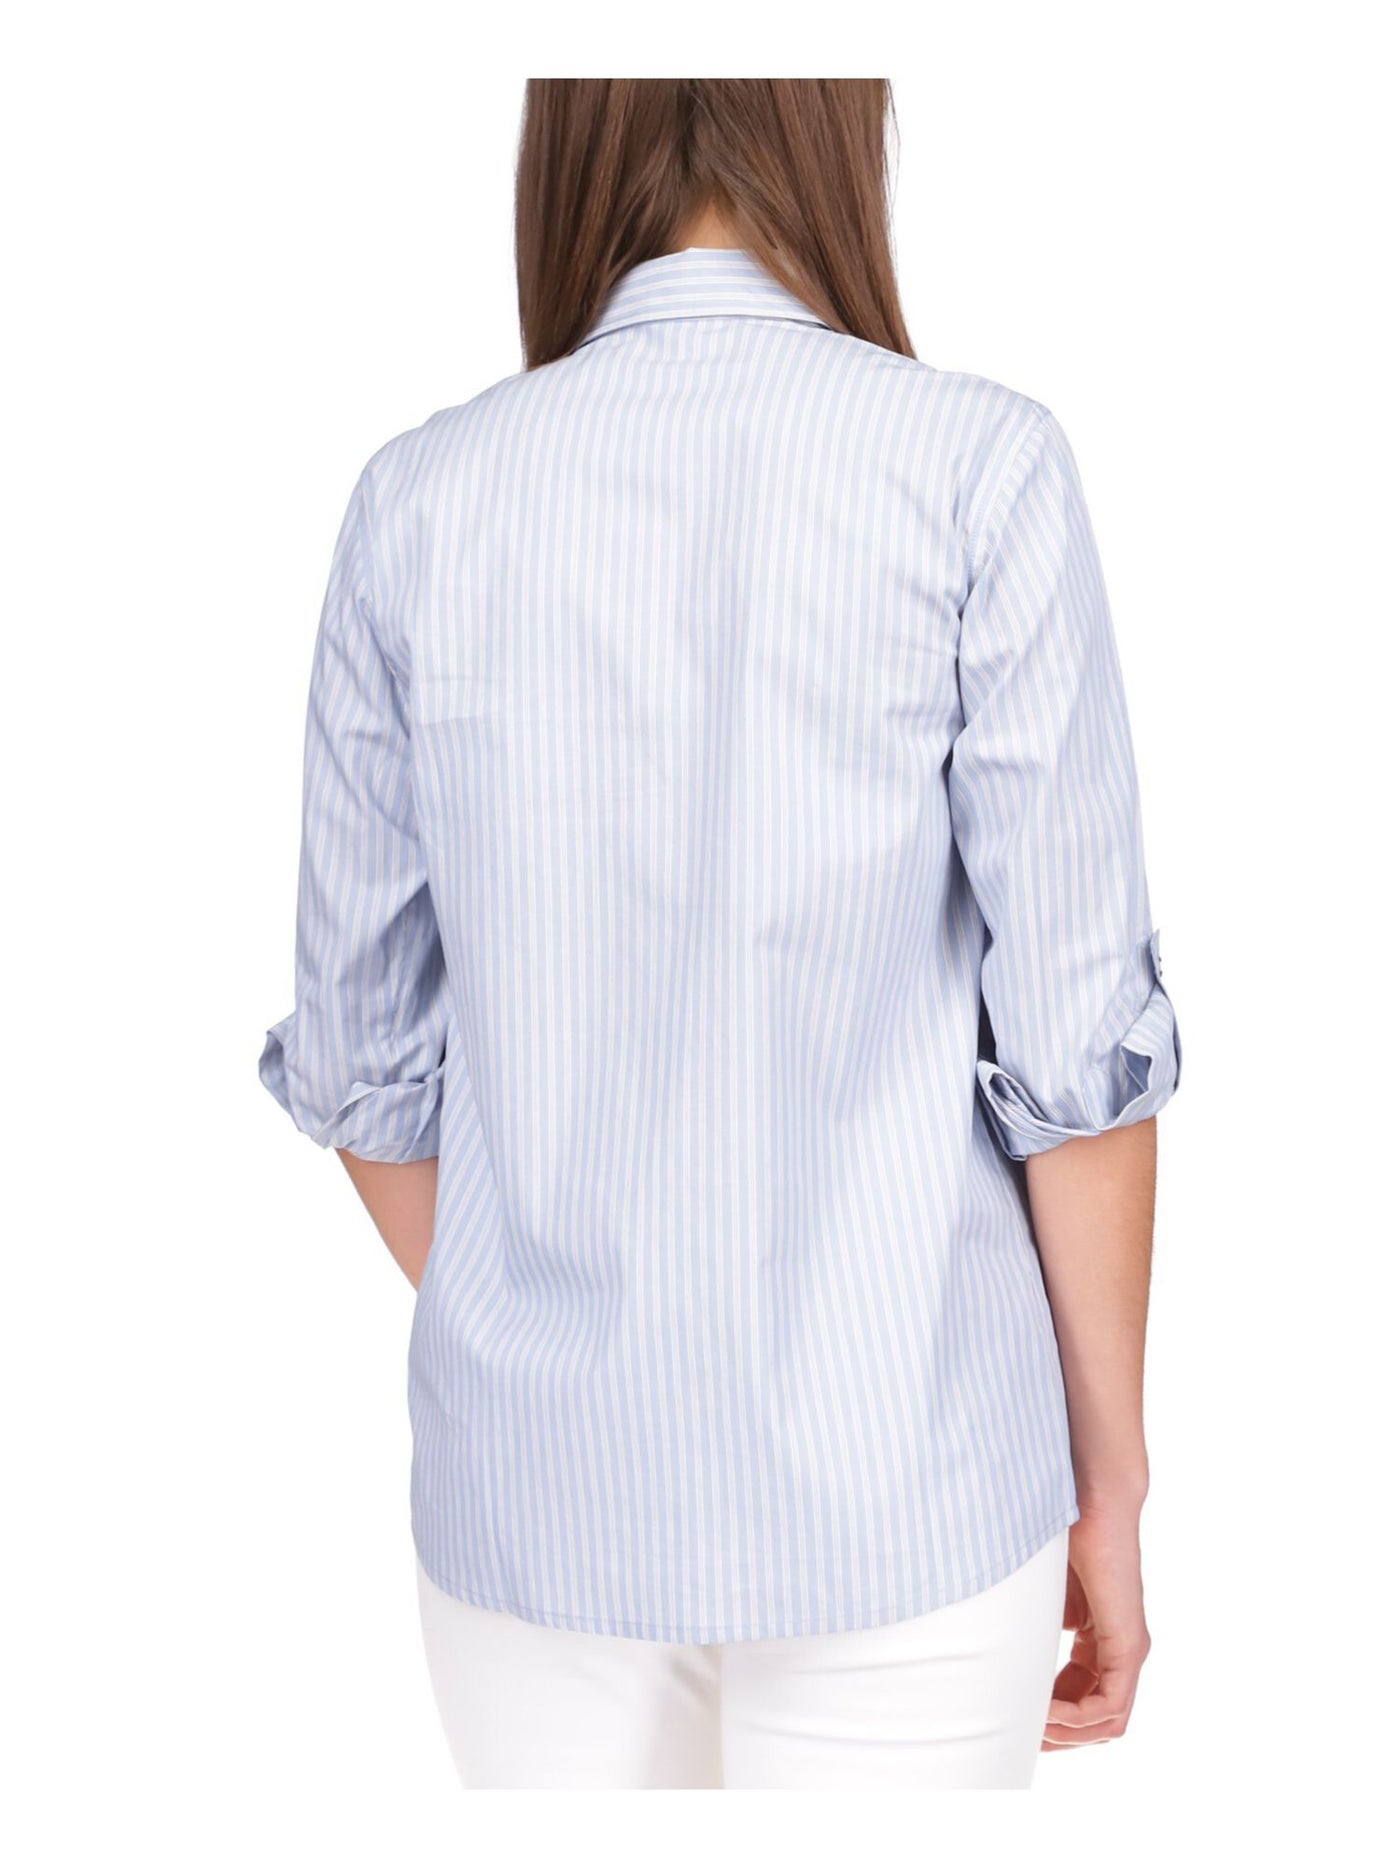 MICHAEL KORS Womens Blue Pocketed Striped Roll-tab Sleeve Point Collar Button Up Top XL